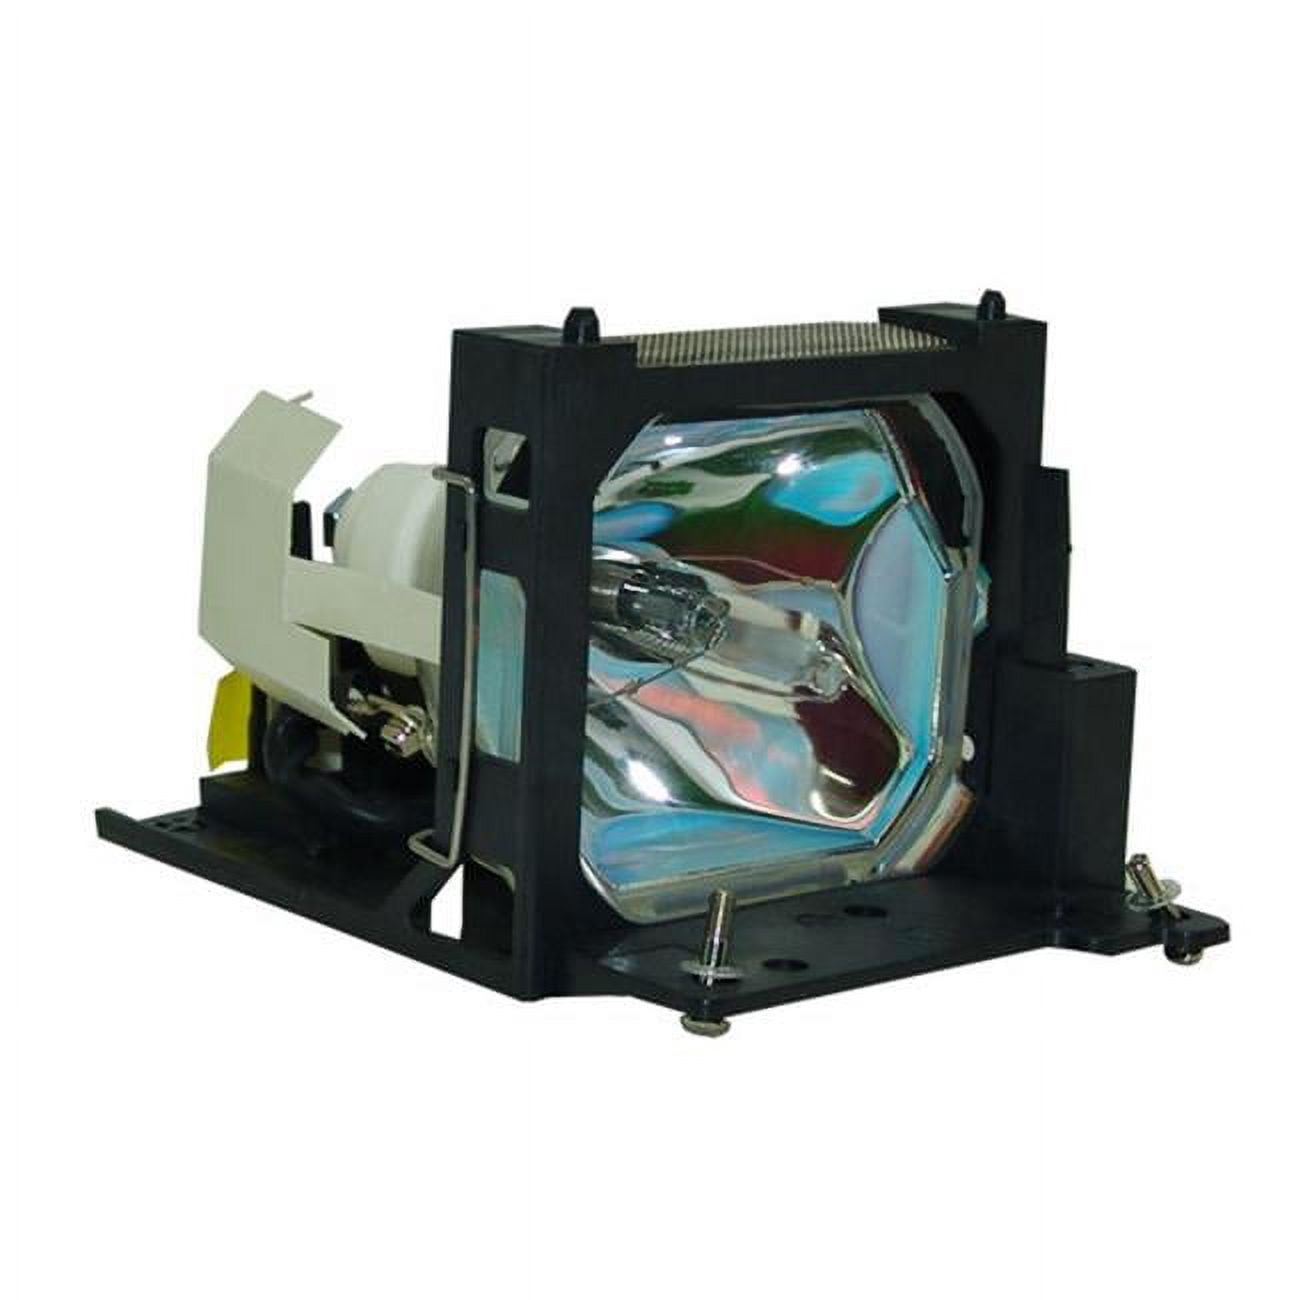 Picture of Dynamic Lamps 52196-G ViewSonic RLC-160-03A Compatible Projector Lamp Module